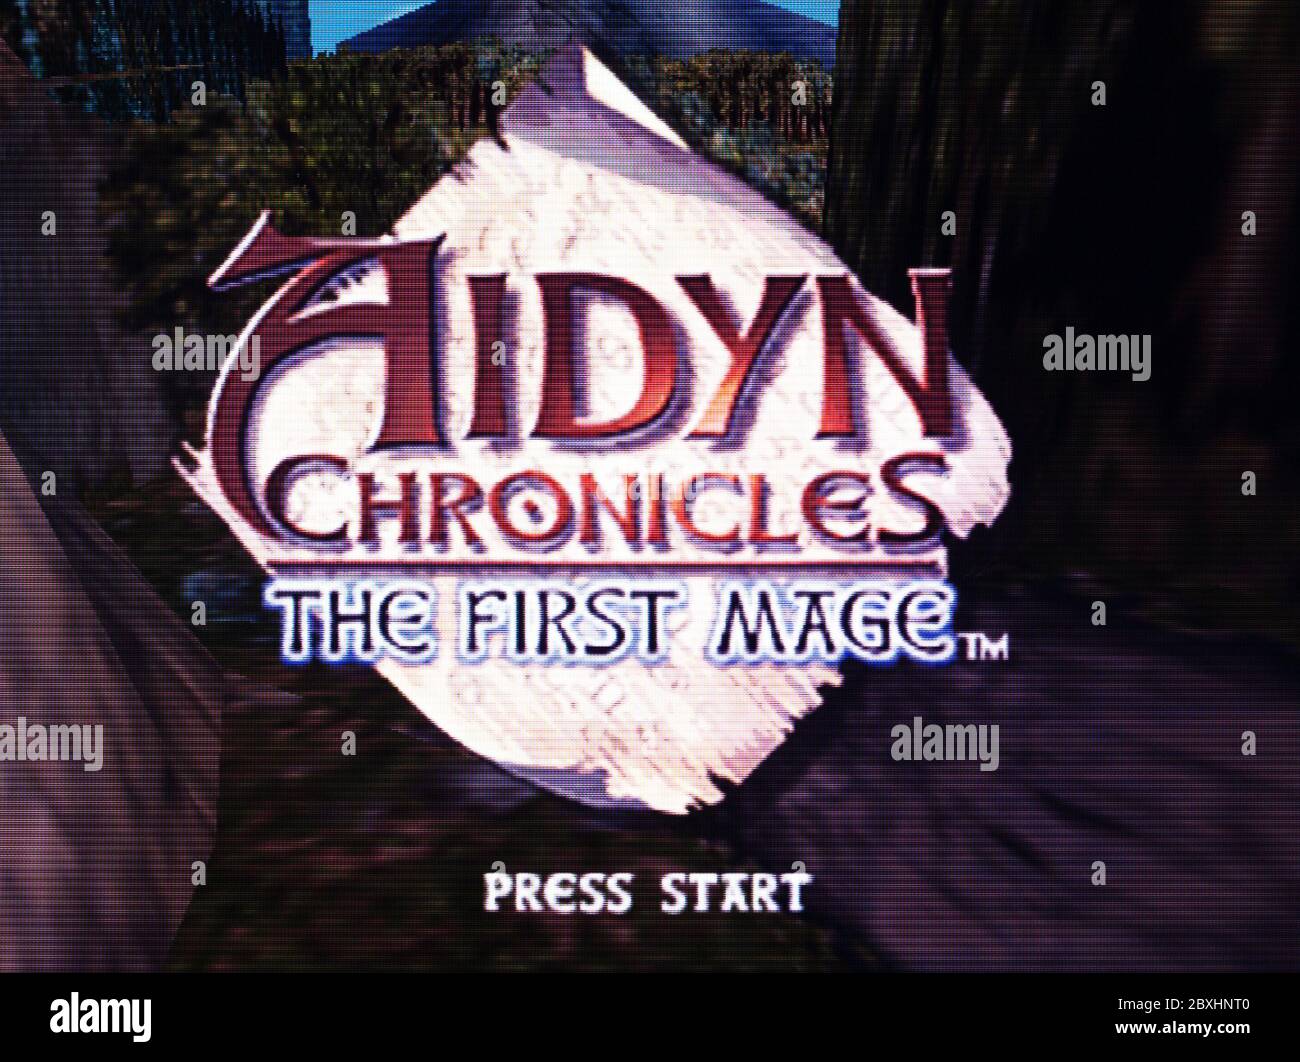 Aidyn Chronicles The First Mage - Nintendo 64 Videogame - solo per uso editoriale Foto Stock